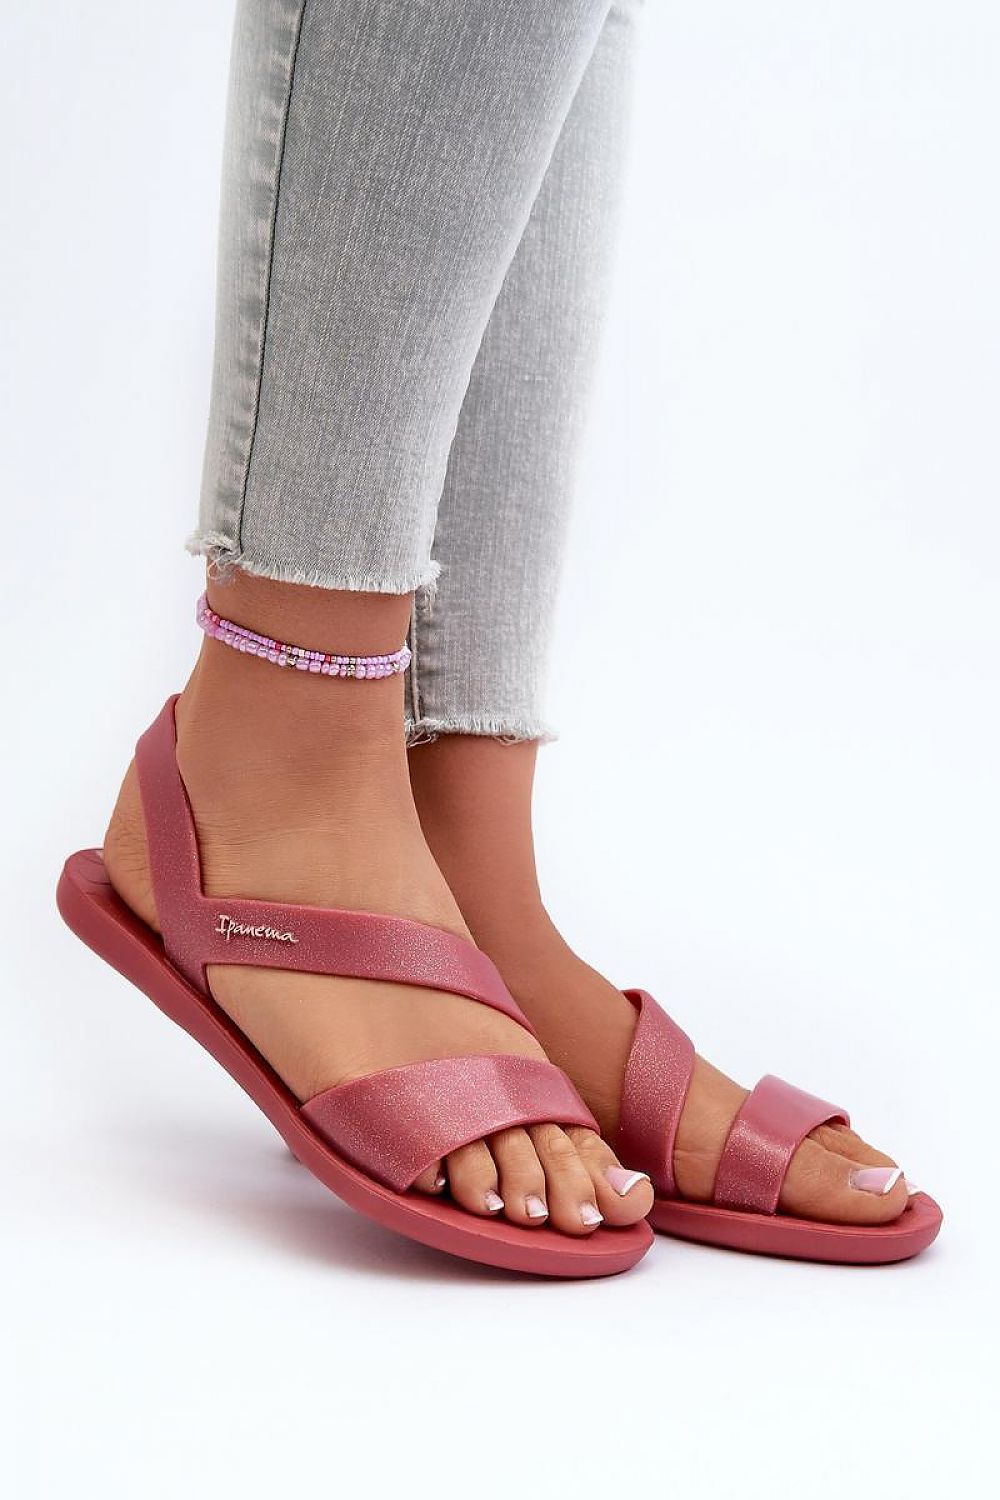 TEEK - Jelly Banded Sandals SHOES TEEK MH pink 7.5 